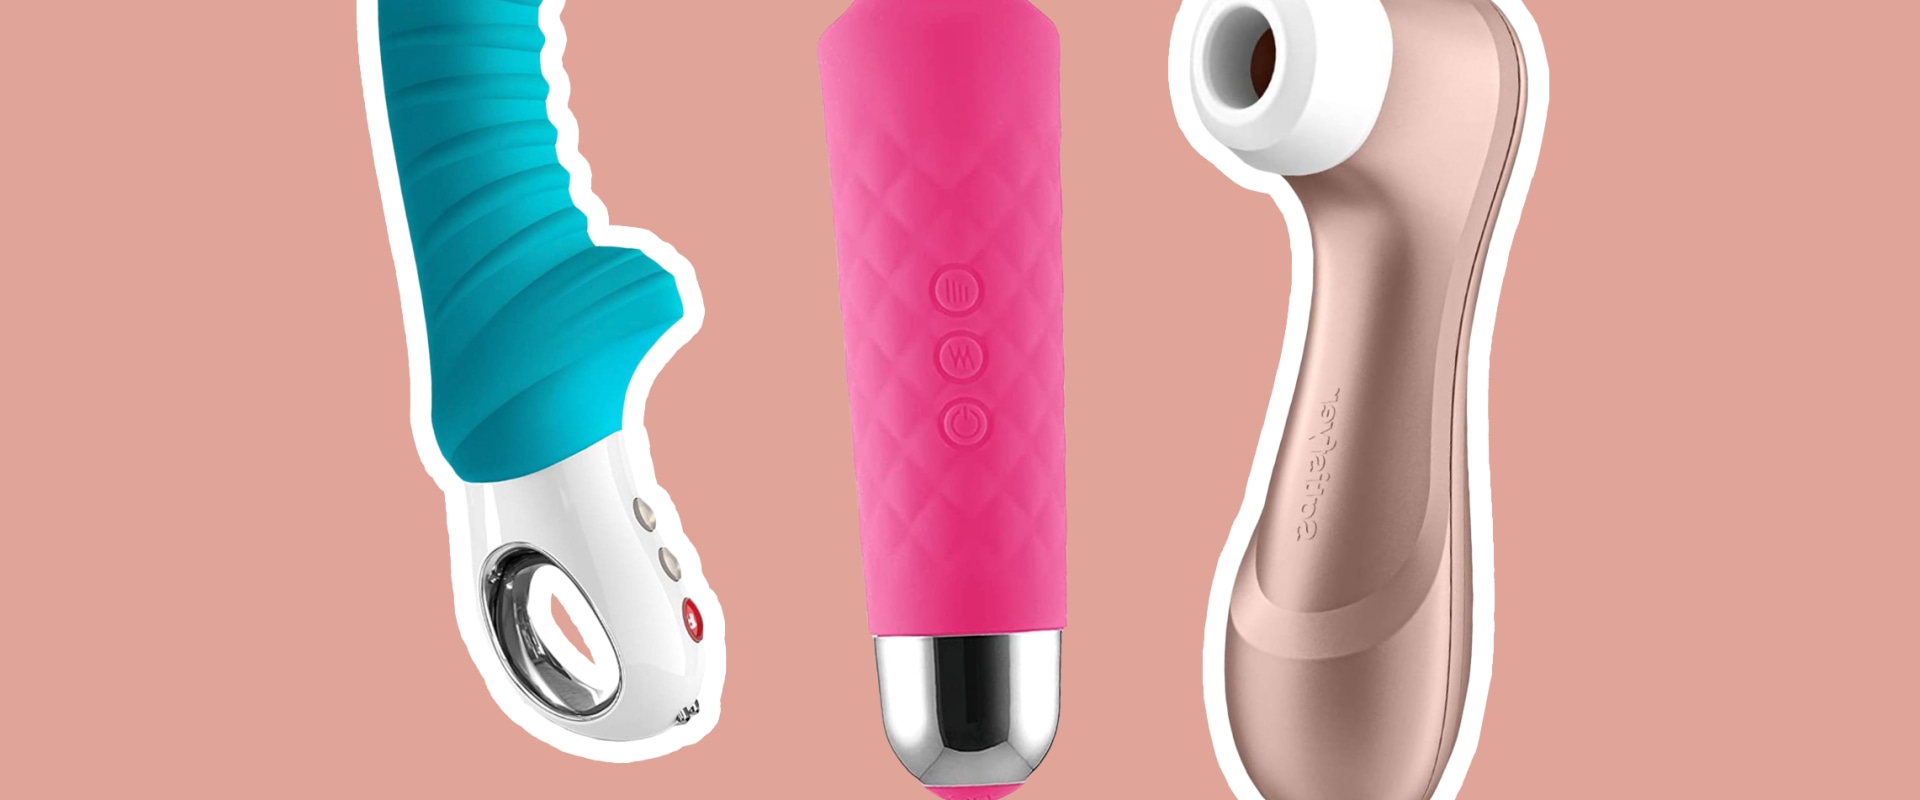 How to Choose the Right Adult Toy for You